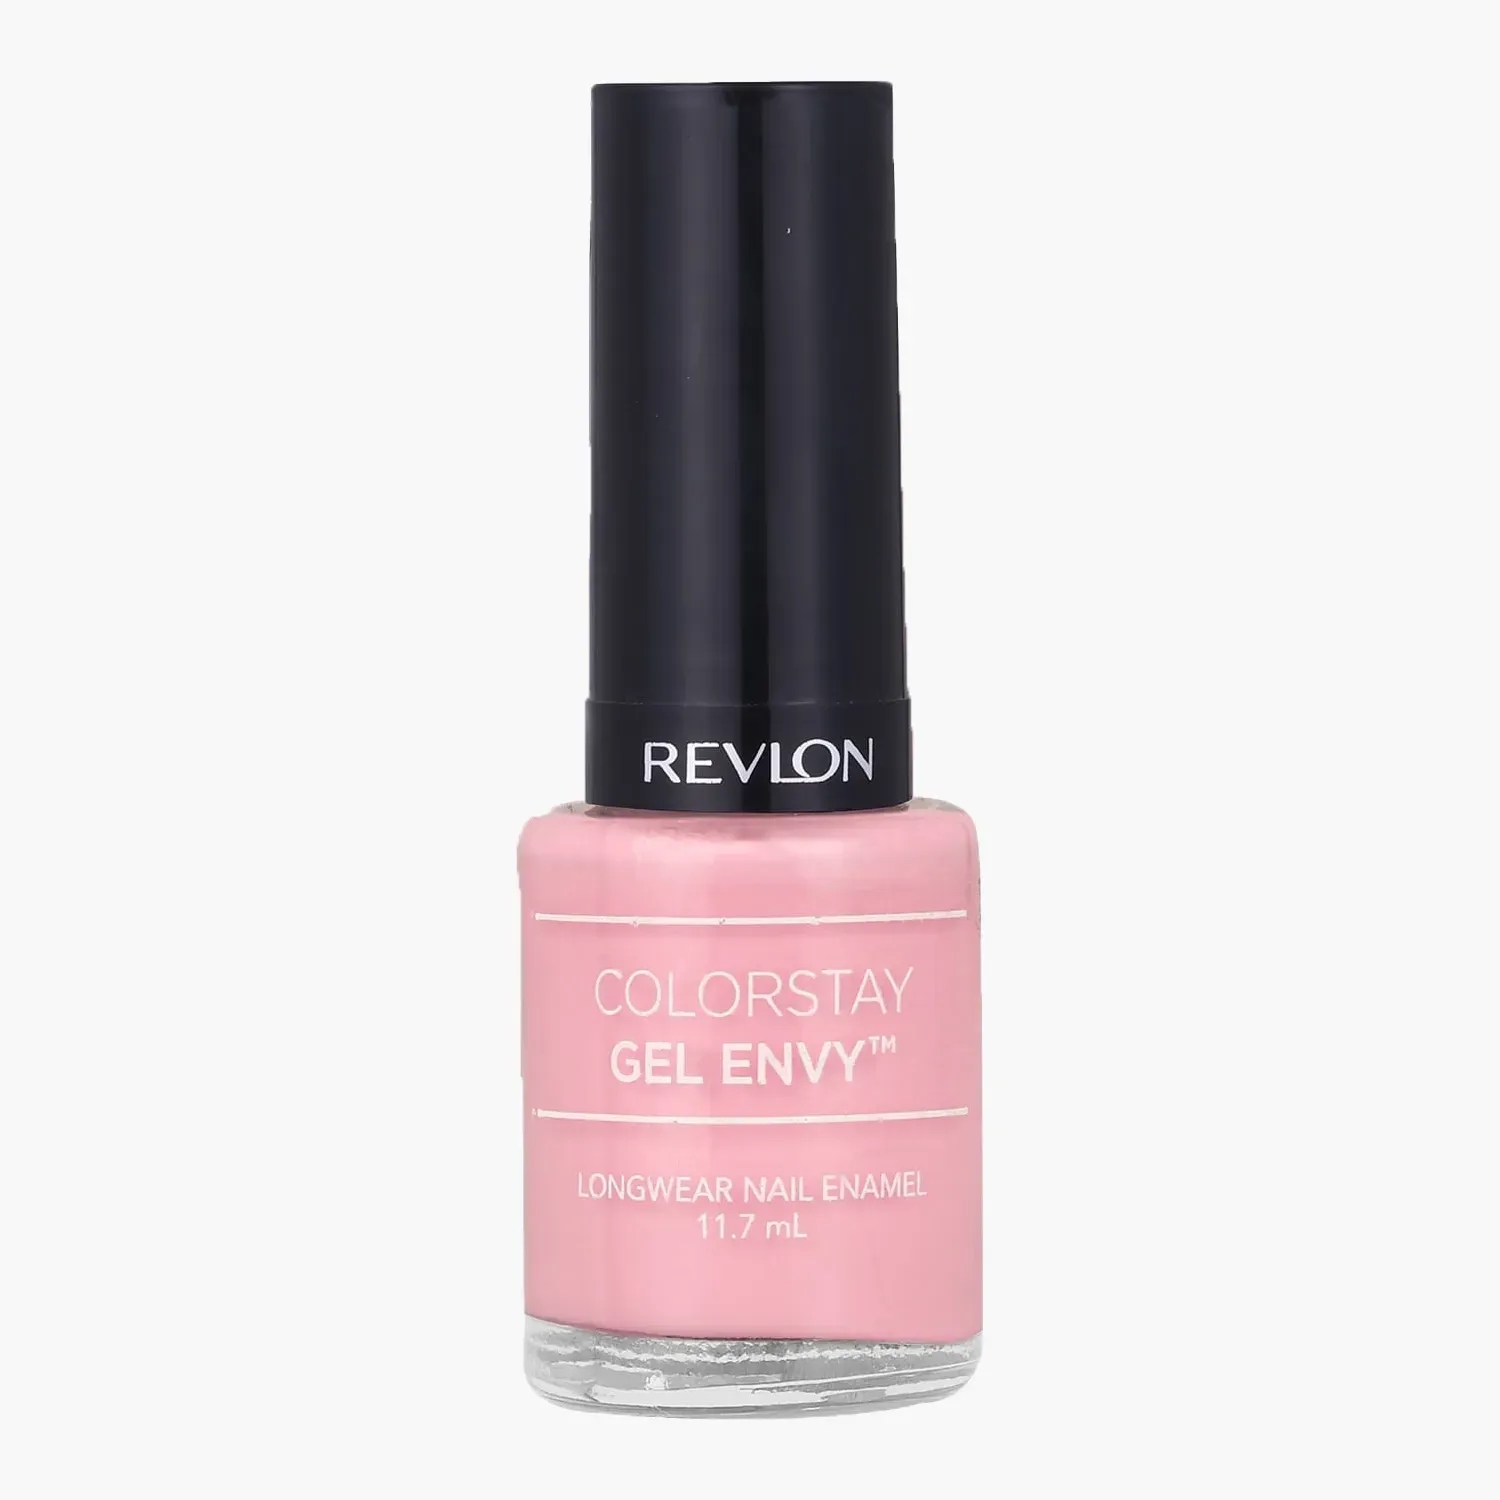 Revlon Color Stay Gel Envy - Hot Hand - اندروميدا